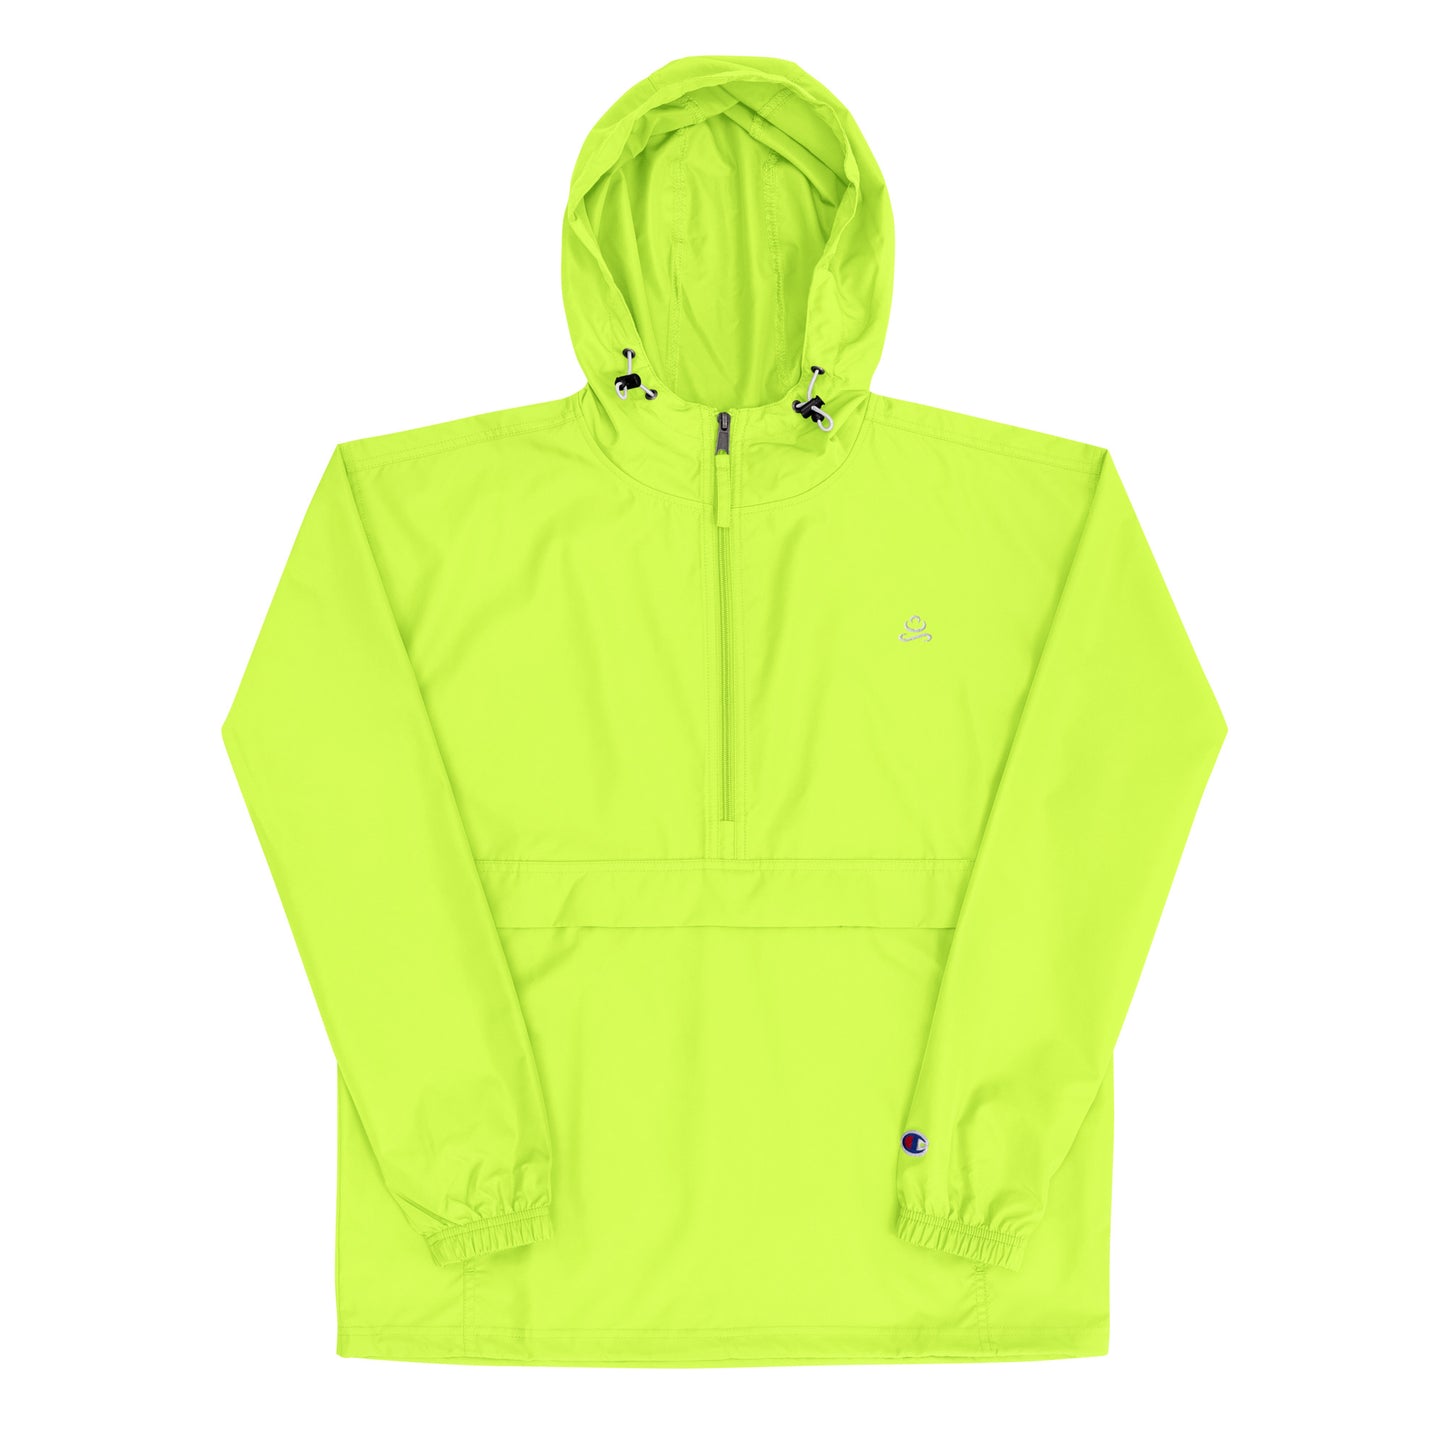 Safety Green Embroidered Champion Packable Jacket by Jain Yoga sold by Jain Yoga